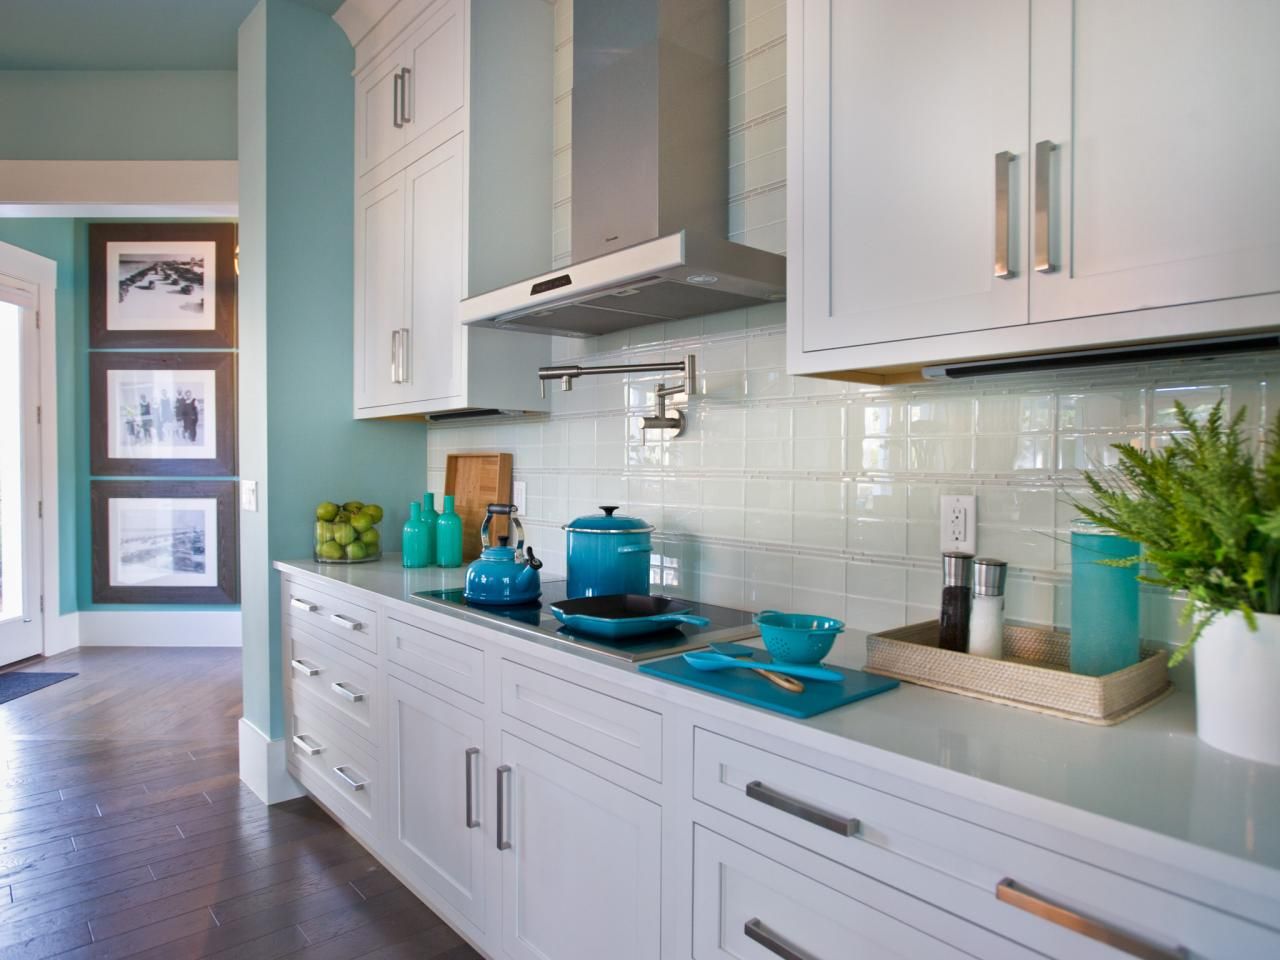 6 Creative Ways to Spice Up Your Kitchen with Subway Tiles post thumbnail image